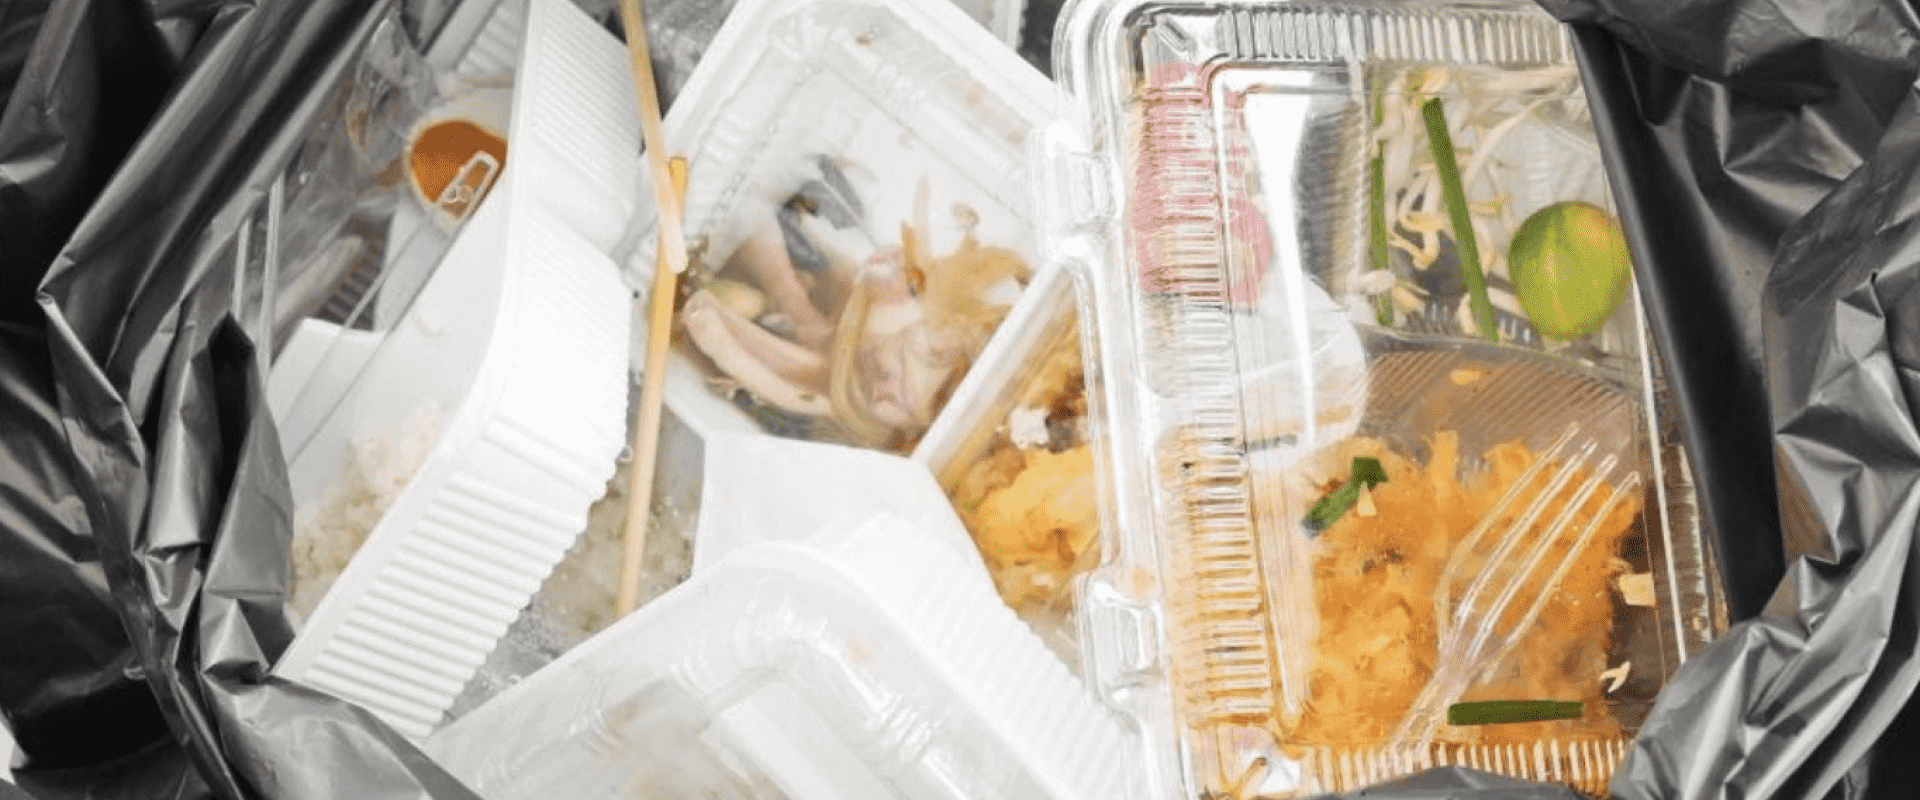 This Is What Really Happens To Retail Food Waste | Shelf Engine Blog